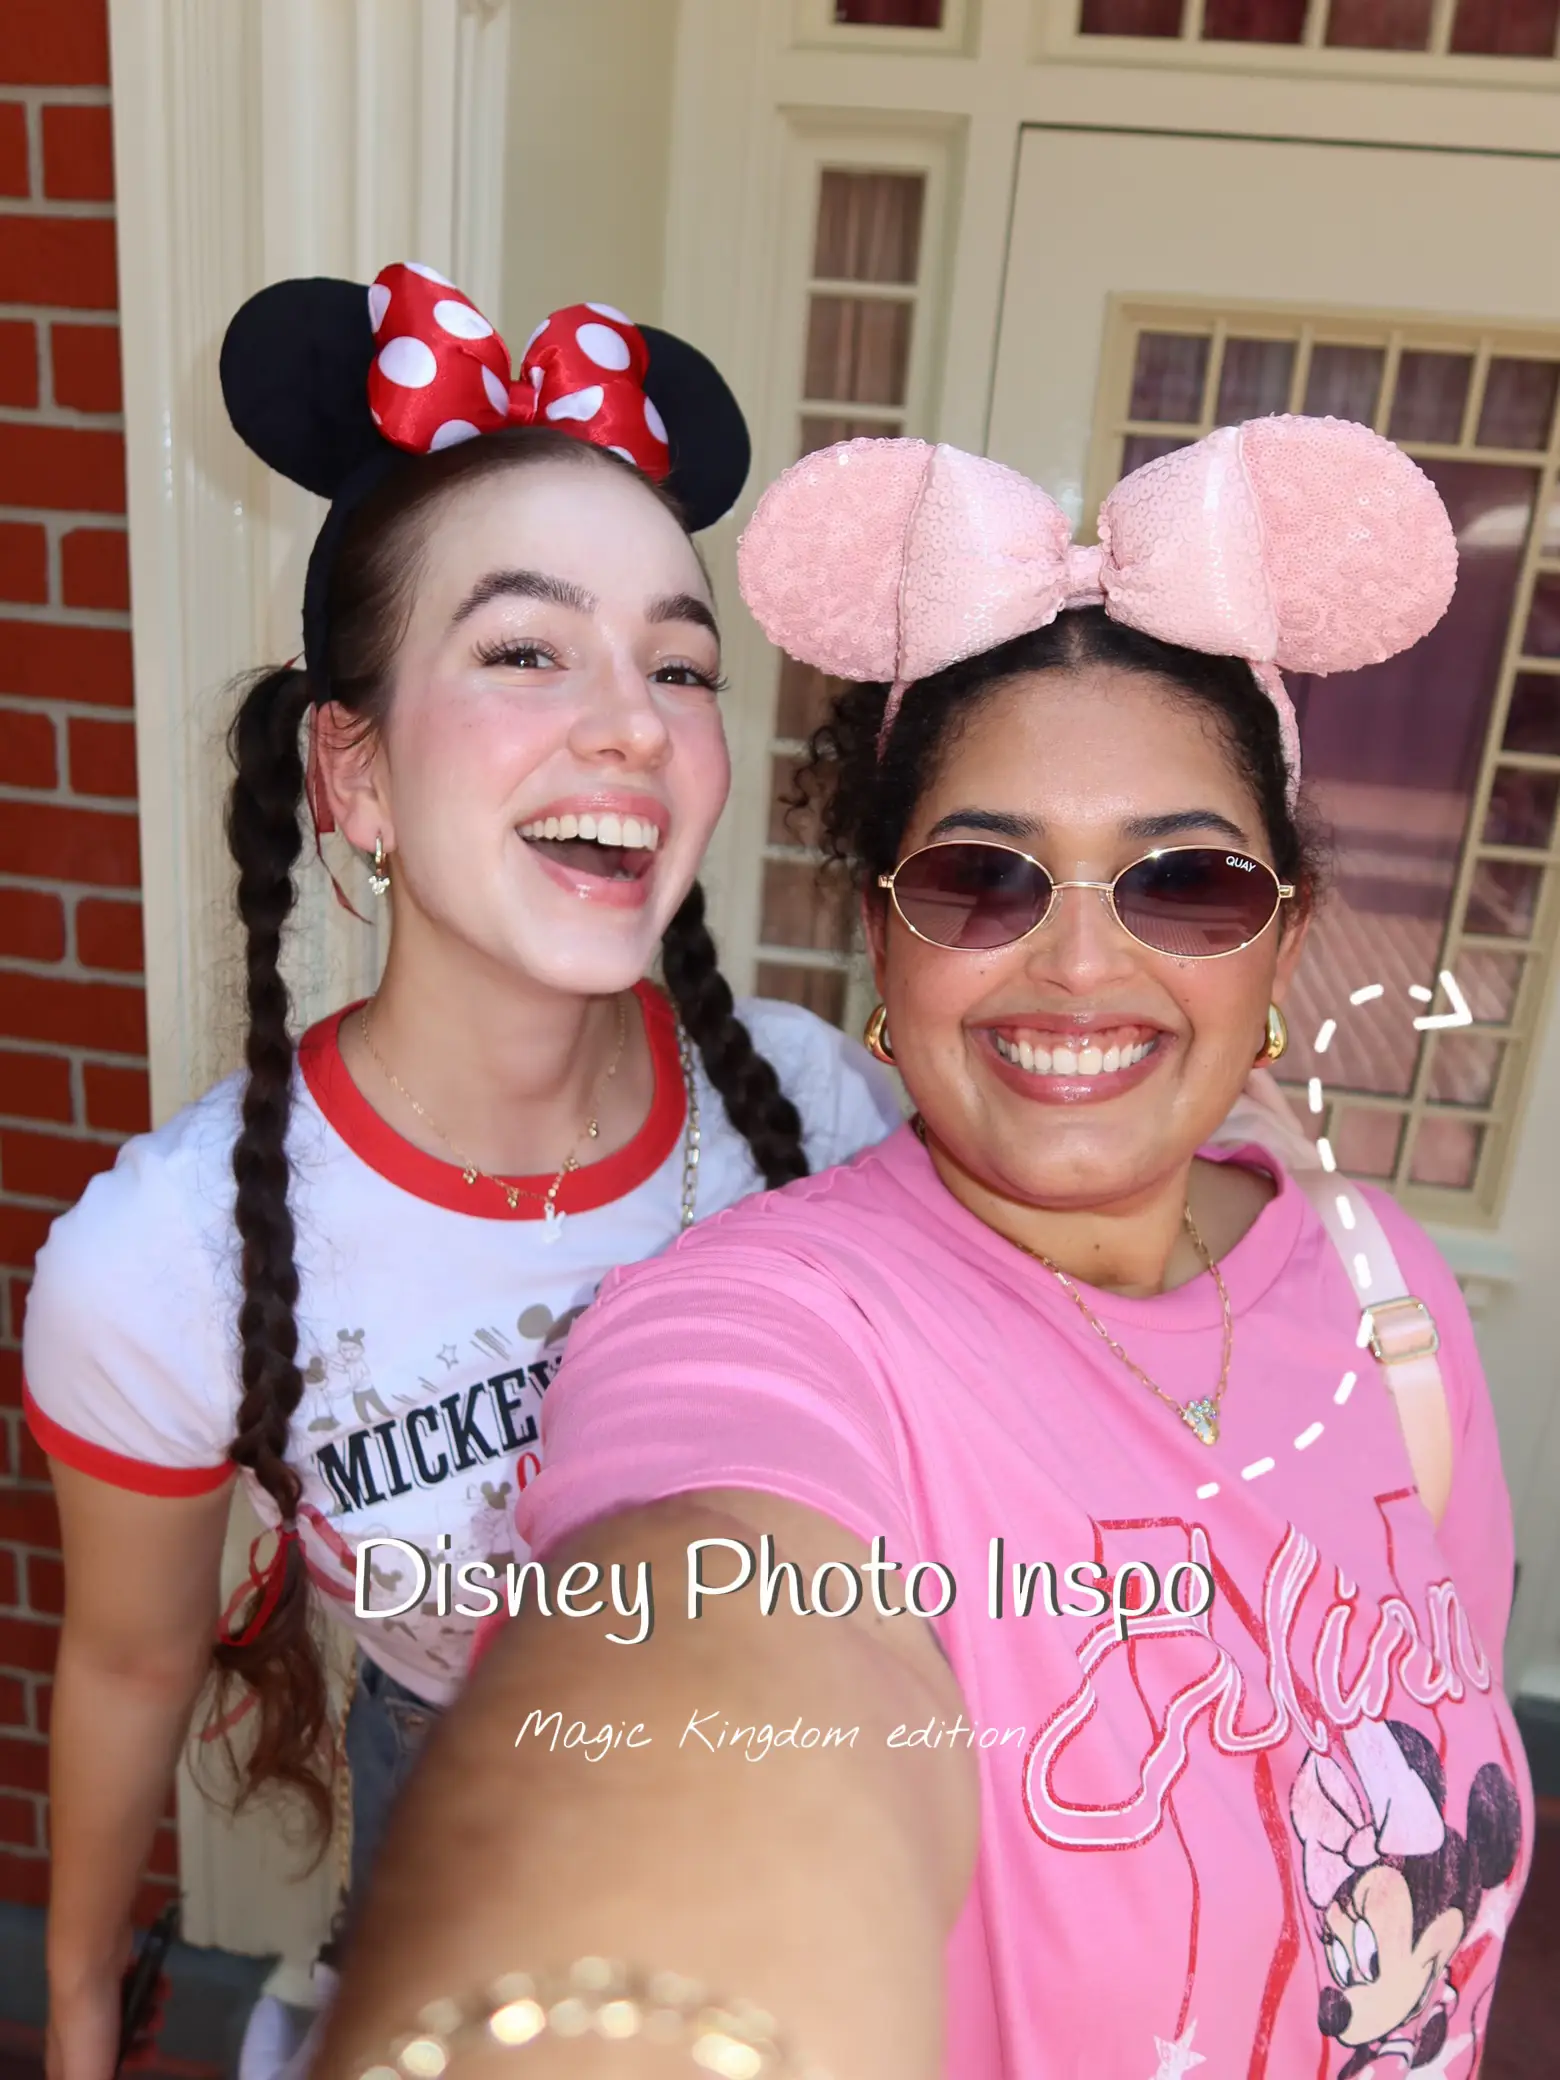  Two women are standing together, wearing Minnie Mouse ears on their heads and smiling.